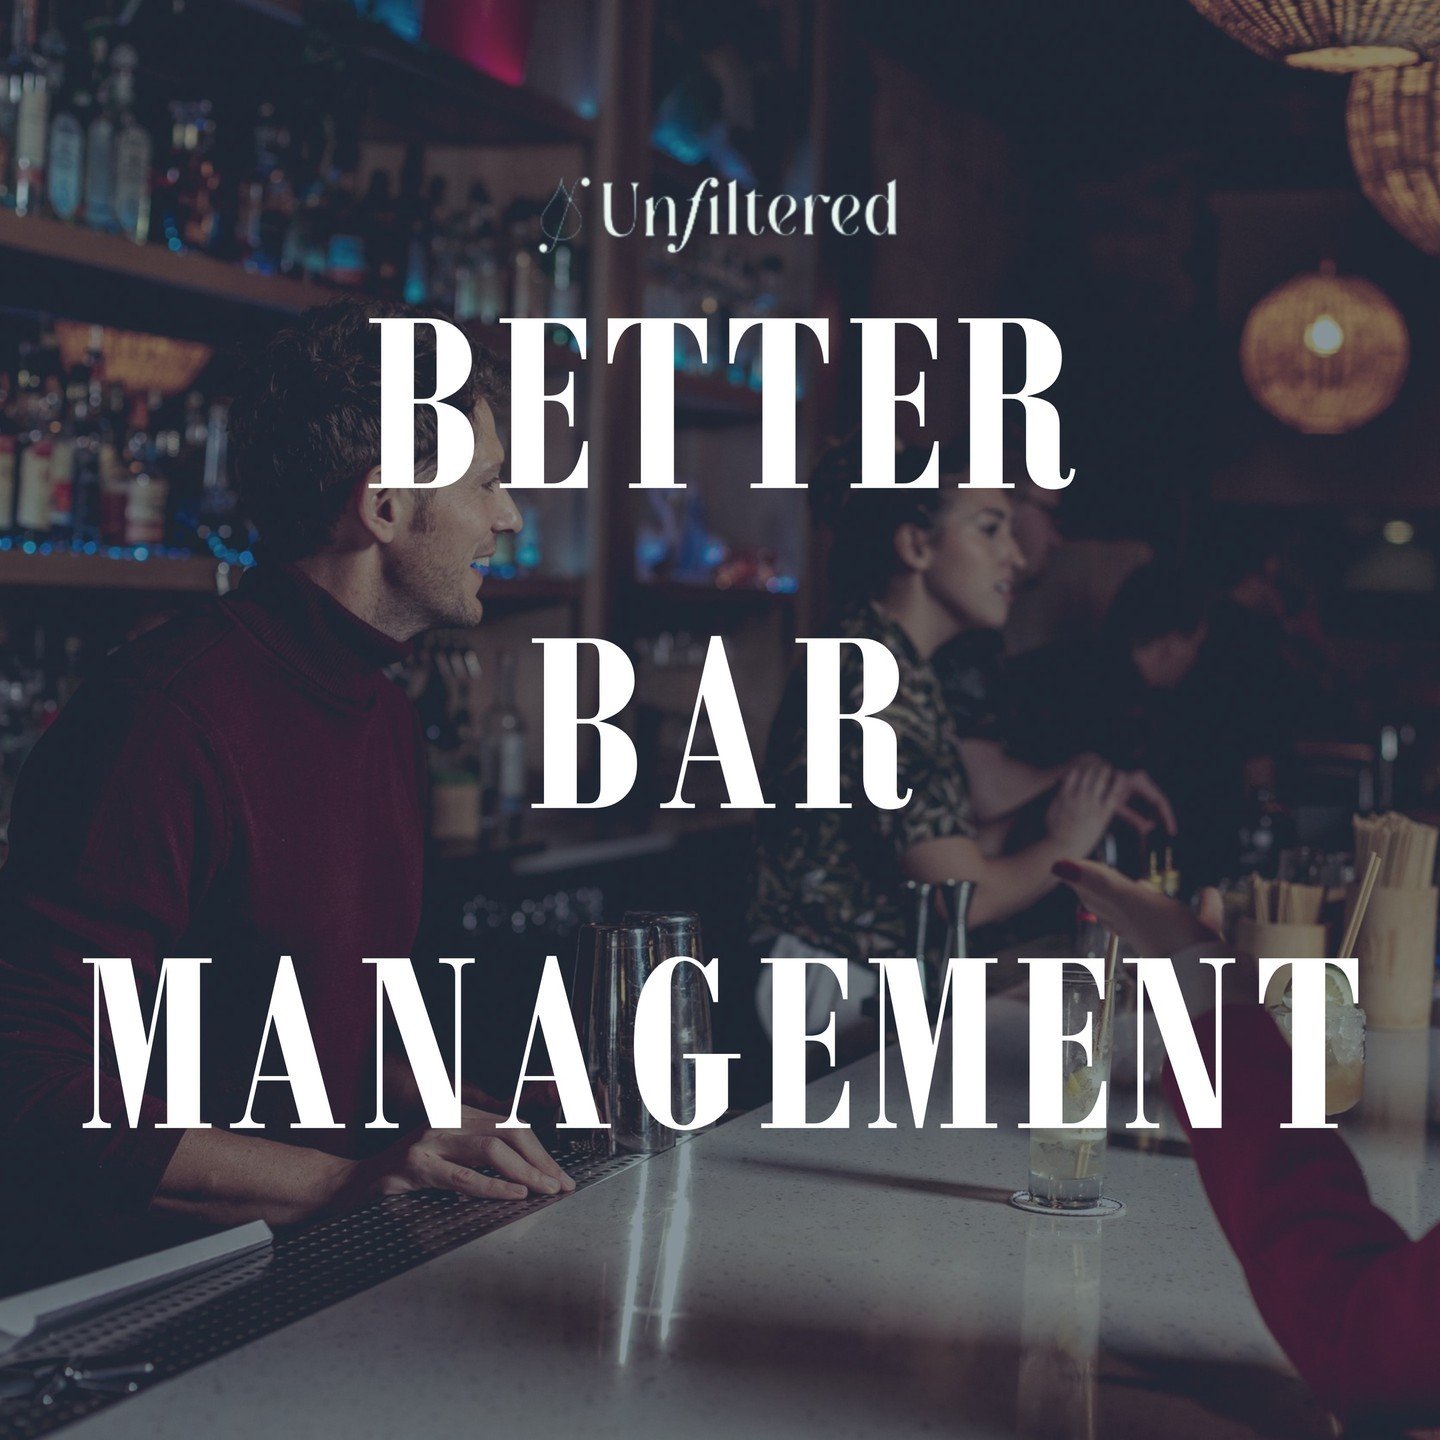 It can&rsquo;t be overstated. Great management is absolutely essential when it comes to your bar&rsquo;s success. ⁠
⁠
Using real world solutions, our experts coach your bar management team to success, using a multifaceted approach that:⁠
⁠
▪️Fosters 